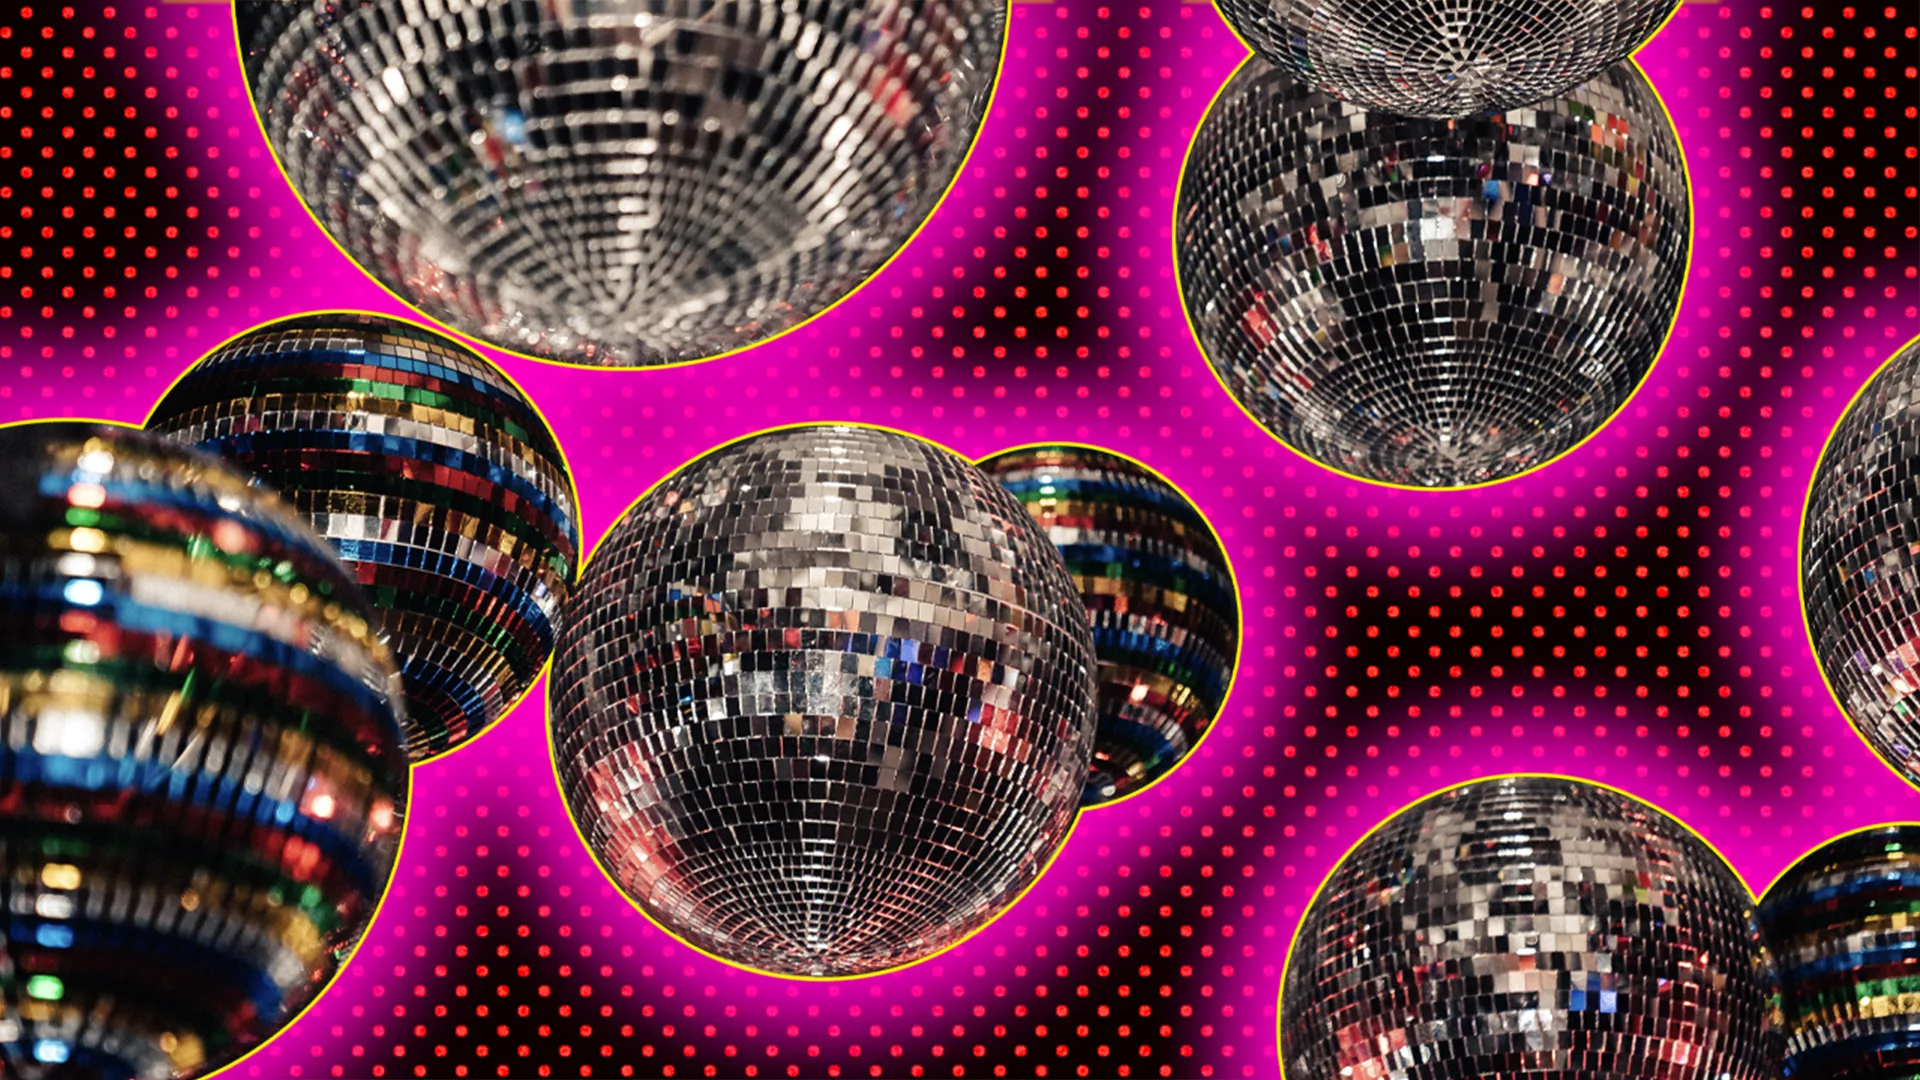 Many disco balls outlined in a. purple halo effect on a black and red spotty background